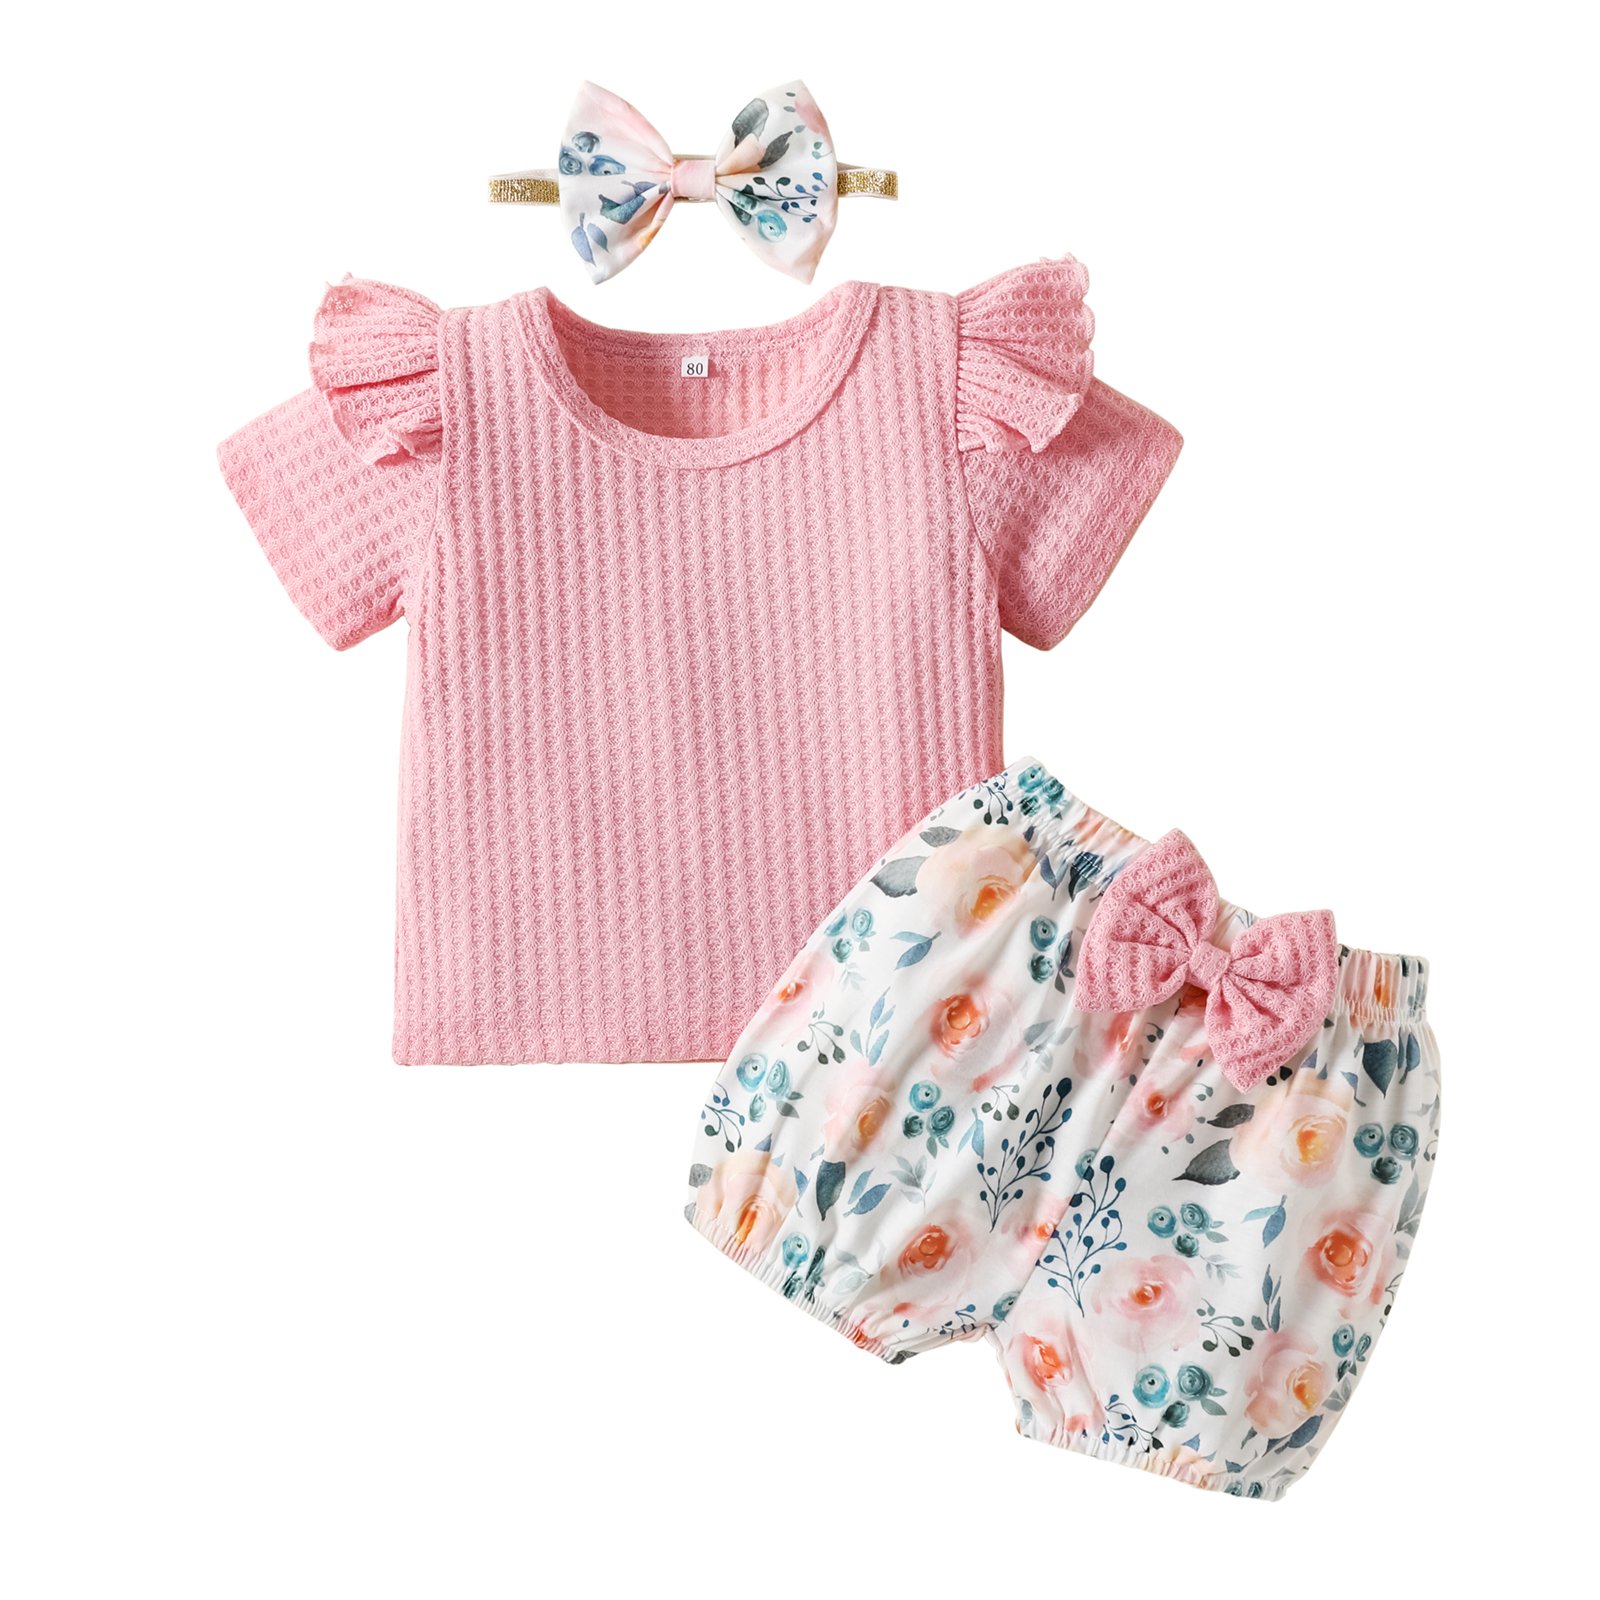 Products - Liuliukd - China Wholesale Kids Clothes Supplier